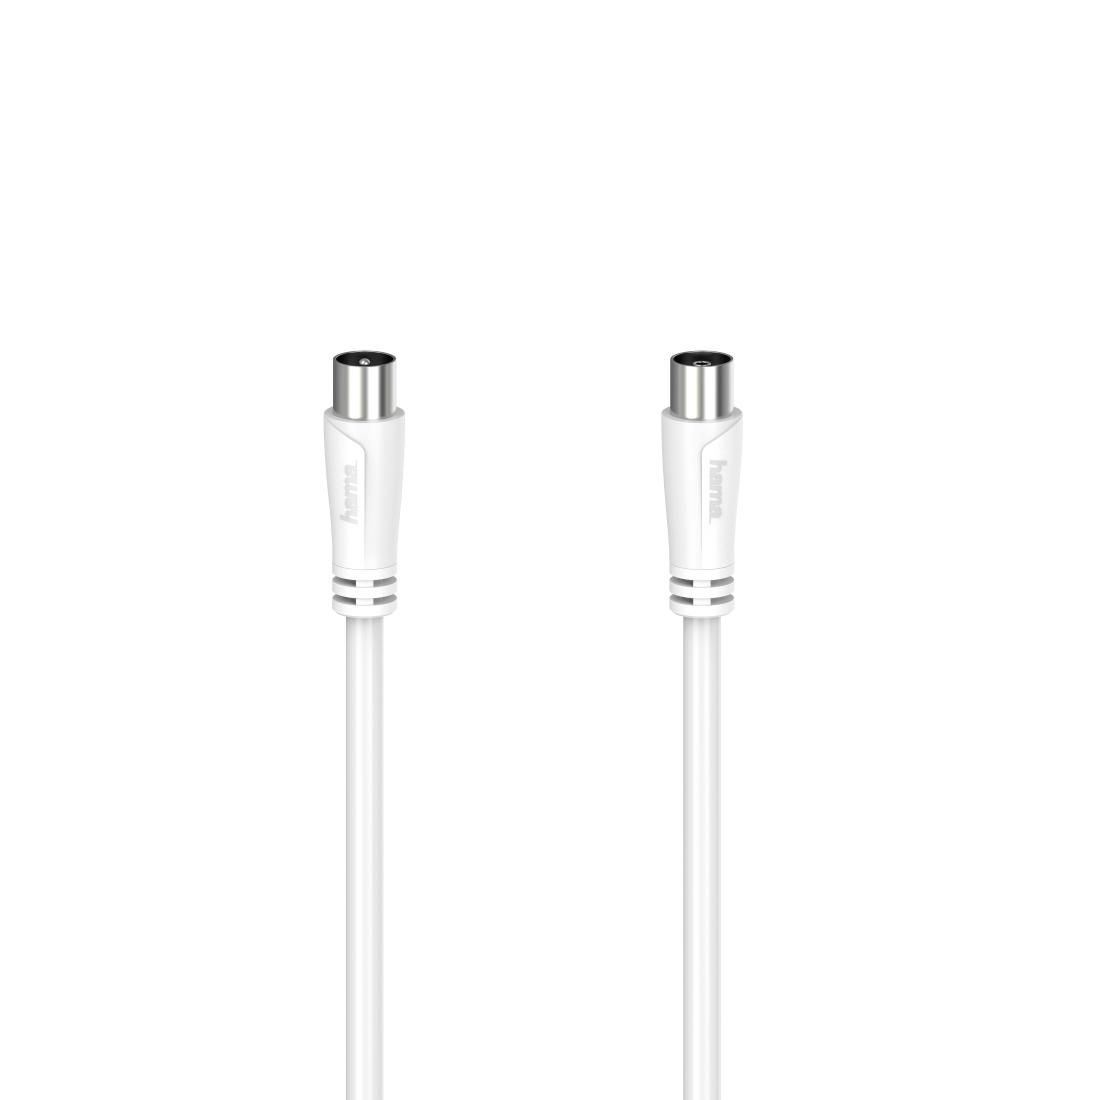 Hama 205050 W128824508 0 Coaxial Cable 15 M White 